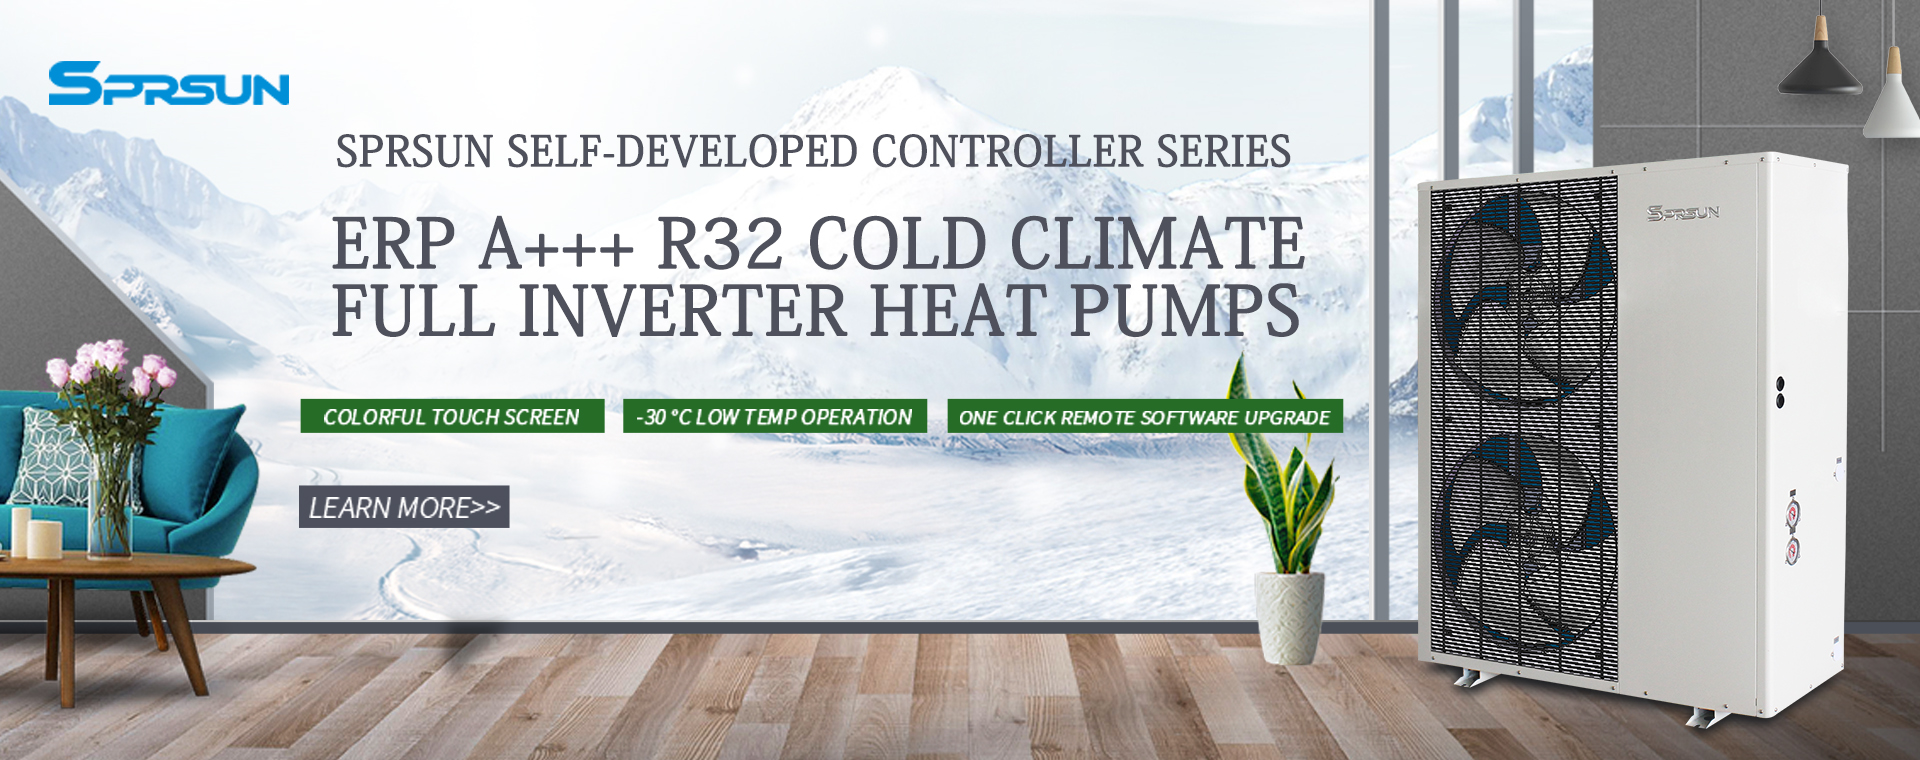 ERP A+++ R32 Cold Climate Full Inverter Heat Pumps